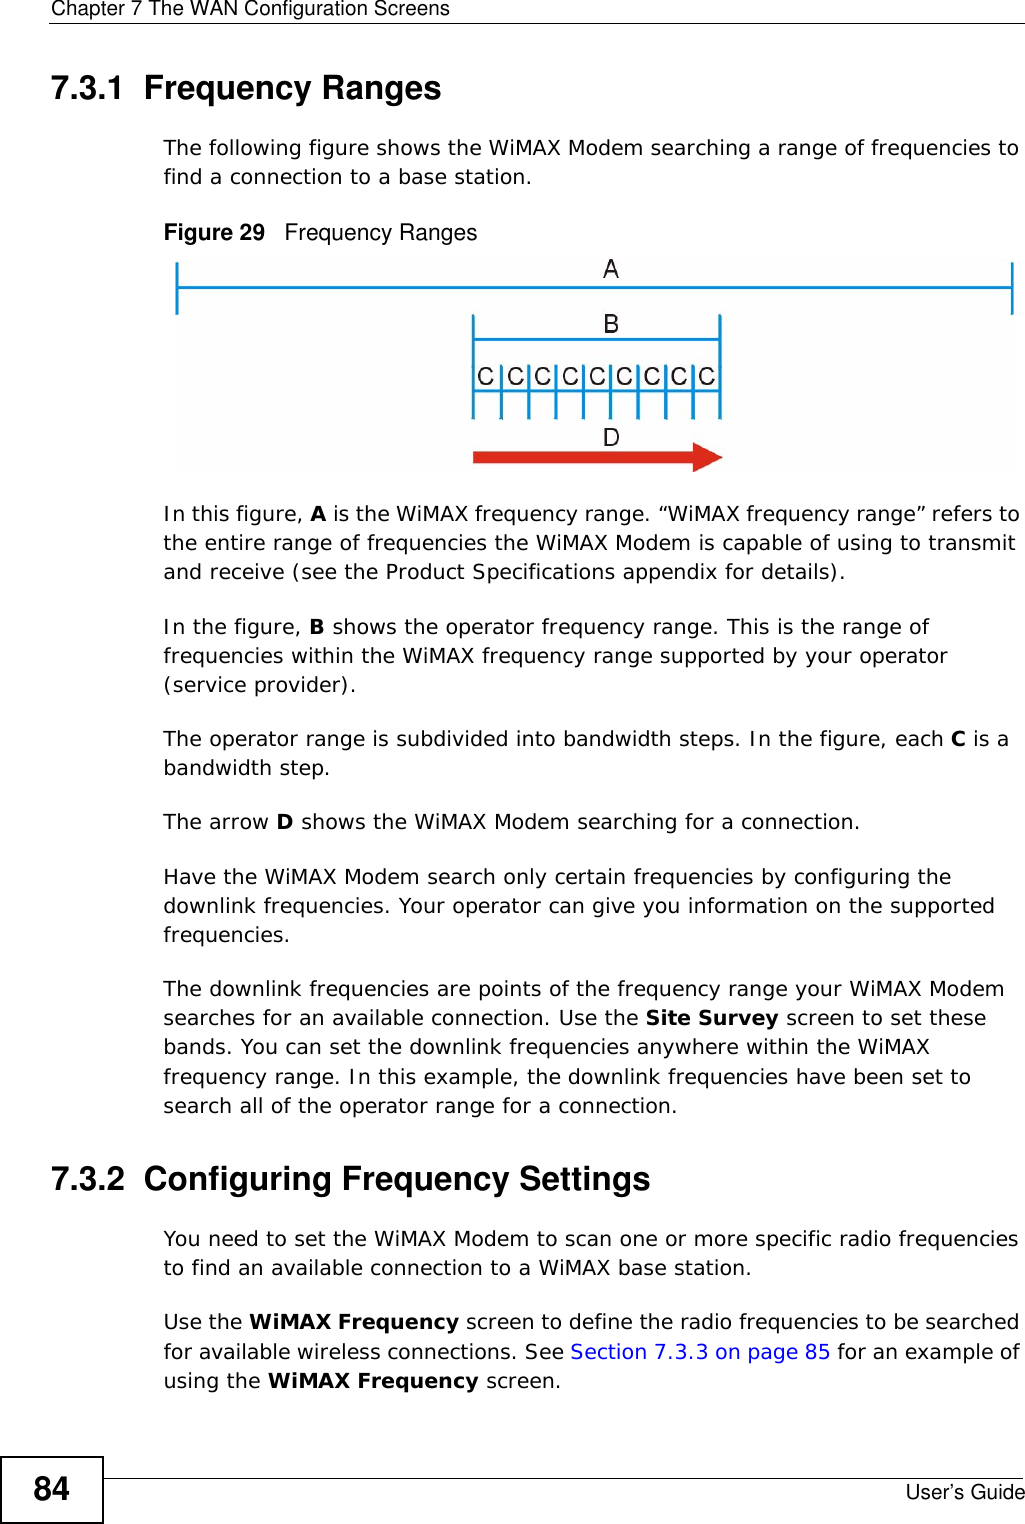 Chapter 7 The WAN Configuration ScreensUser’s Guide847.3.1  Frequency RangesThe following figure shows the WiMAX Modem searching a range of frequencies to find a connection to a base station. Figure 29   Frequency RangesIn this figure, A is the WiMAX frequency range. “WiMAX frequency range” refers to the entire range of frequencies the WiMAX Modem is capable of using to transmit and receive (see the Product Specifications appendix for details). In the figure, B shows the operator frequency range. This is the range of frequencies within the WiMAX frequency range supported by your operator (service provider).The operator range is subdivided into bandwidth steps. In the figure, each C is a bandwidth step.The arrow D shows the WiMAX Modem searching for a connection.Have the WiMAX Modem search only certain frequencies by configuring the downlink frequencies. Your operator can give you information on the supported frequencies. The downlink frequencies are points of the frequency range your WiMAX Modem searches for an available connection. Use the Site Survey screen to set these bands. You can set the downlink frequencies anywhere within the WiMAX frequency range. In this example, the downlink frequencies have been set to search all of the operator range for a connection.7.3.2  Configuring Frequency SettingsYou need to set the WiMAX Modem to scan one or more specific radio frequencies to find an available connection to a WiMAX base station. Use the WiMAX Frequency screen to define the radio frequencies to be searched for available wireless connections. See Section 7.3.3 on page 85 for an example of using the WiMAX Frequency screen.